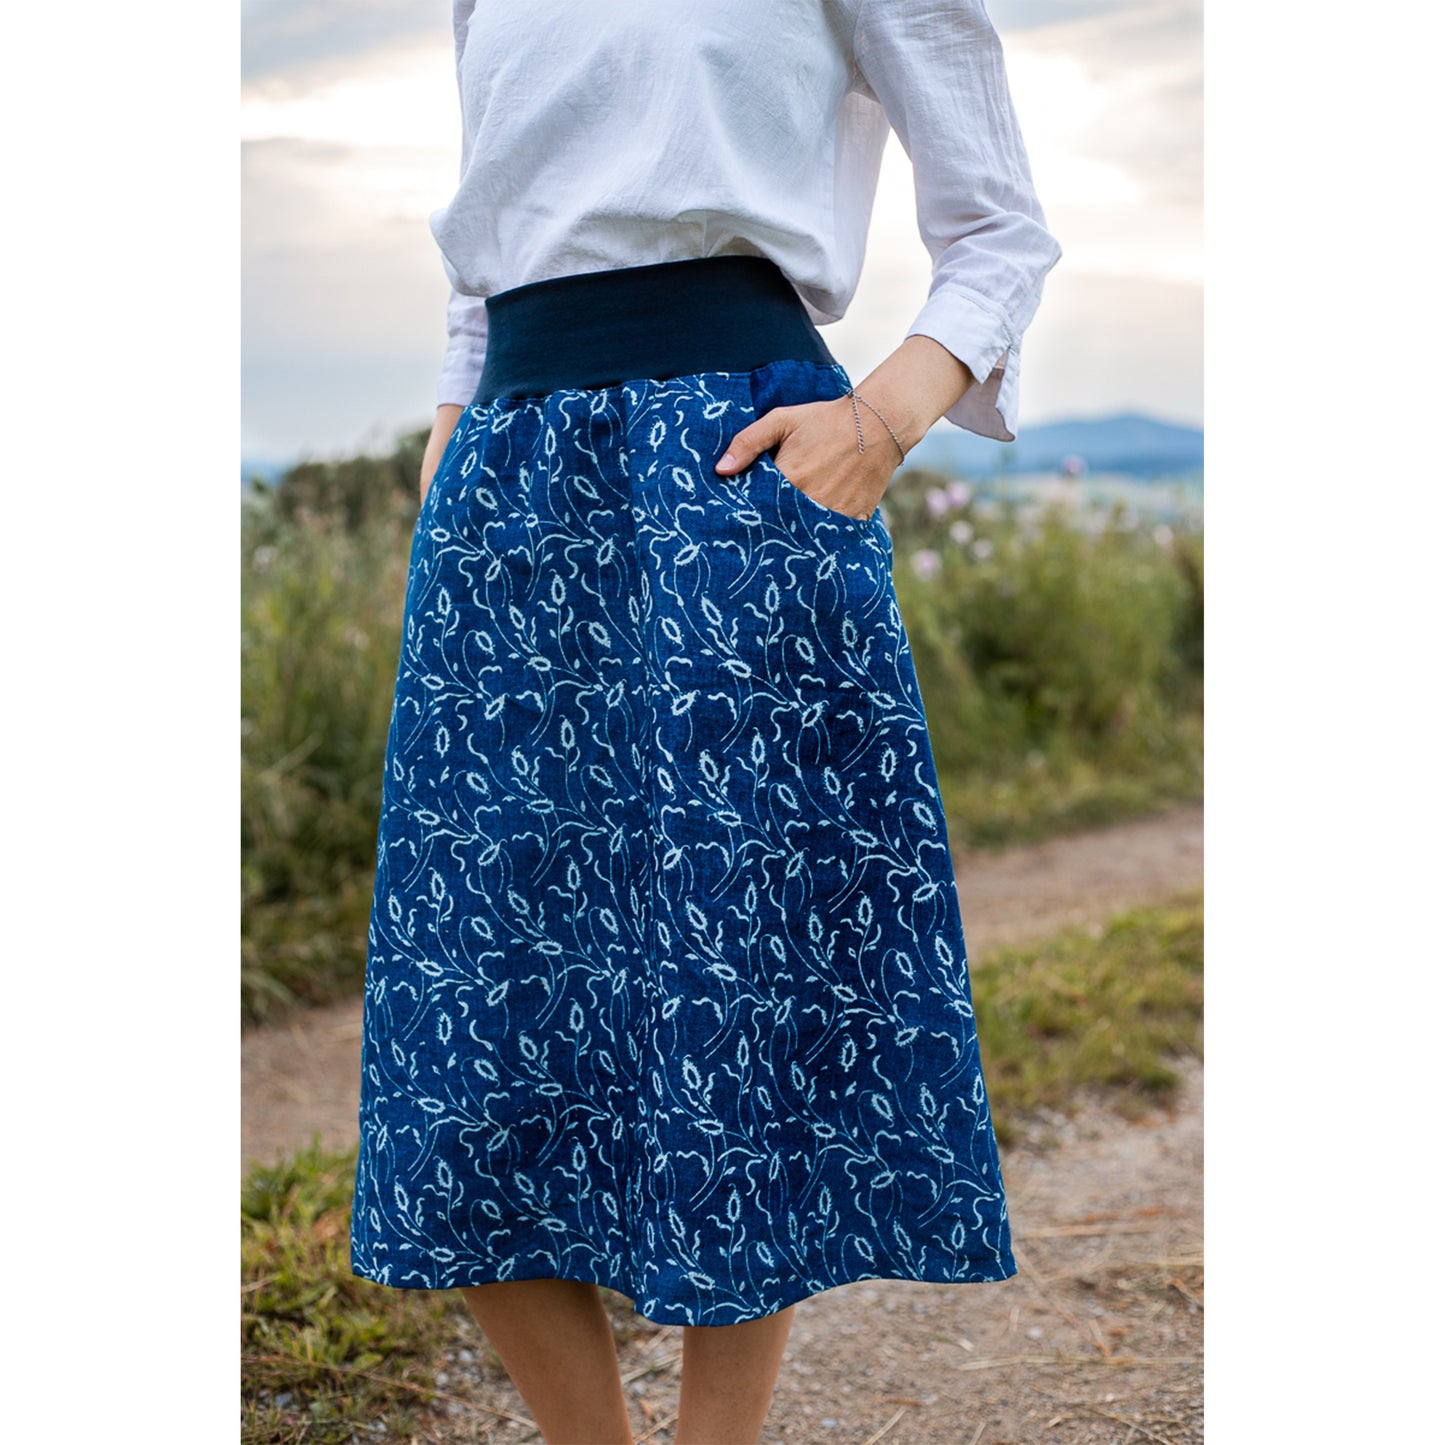 Austria, Karl and Maria Wagner, Mia Skirt in Wollgras Print